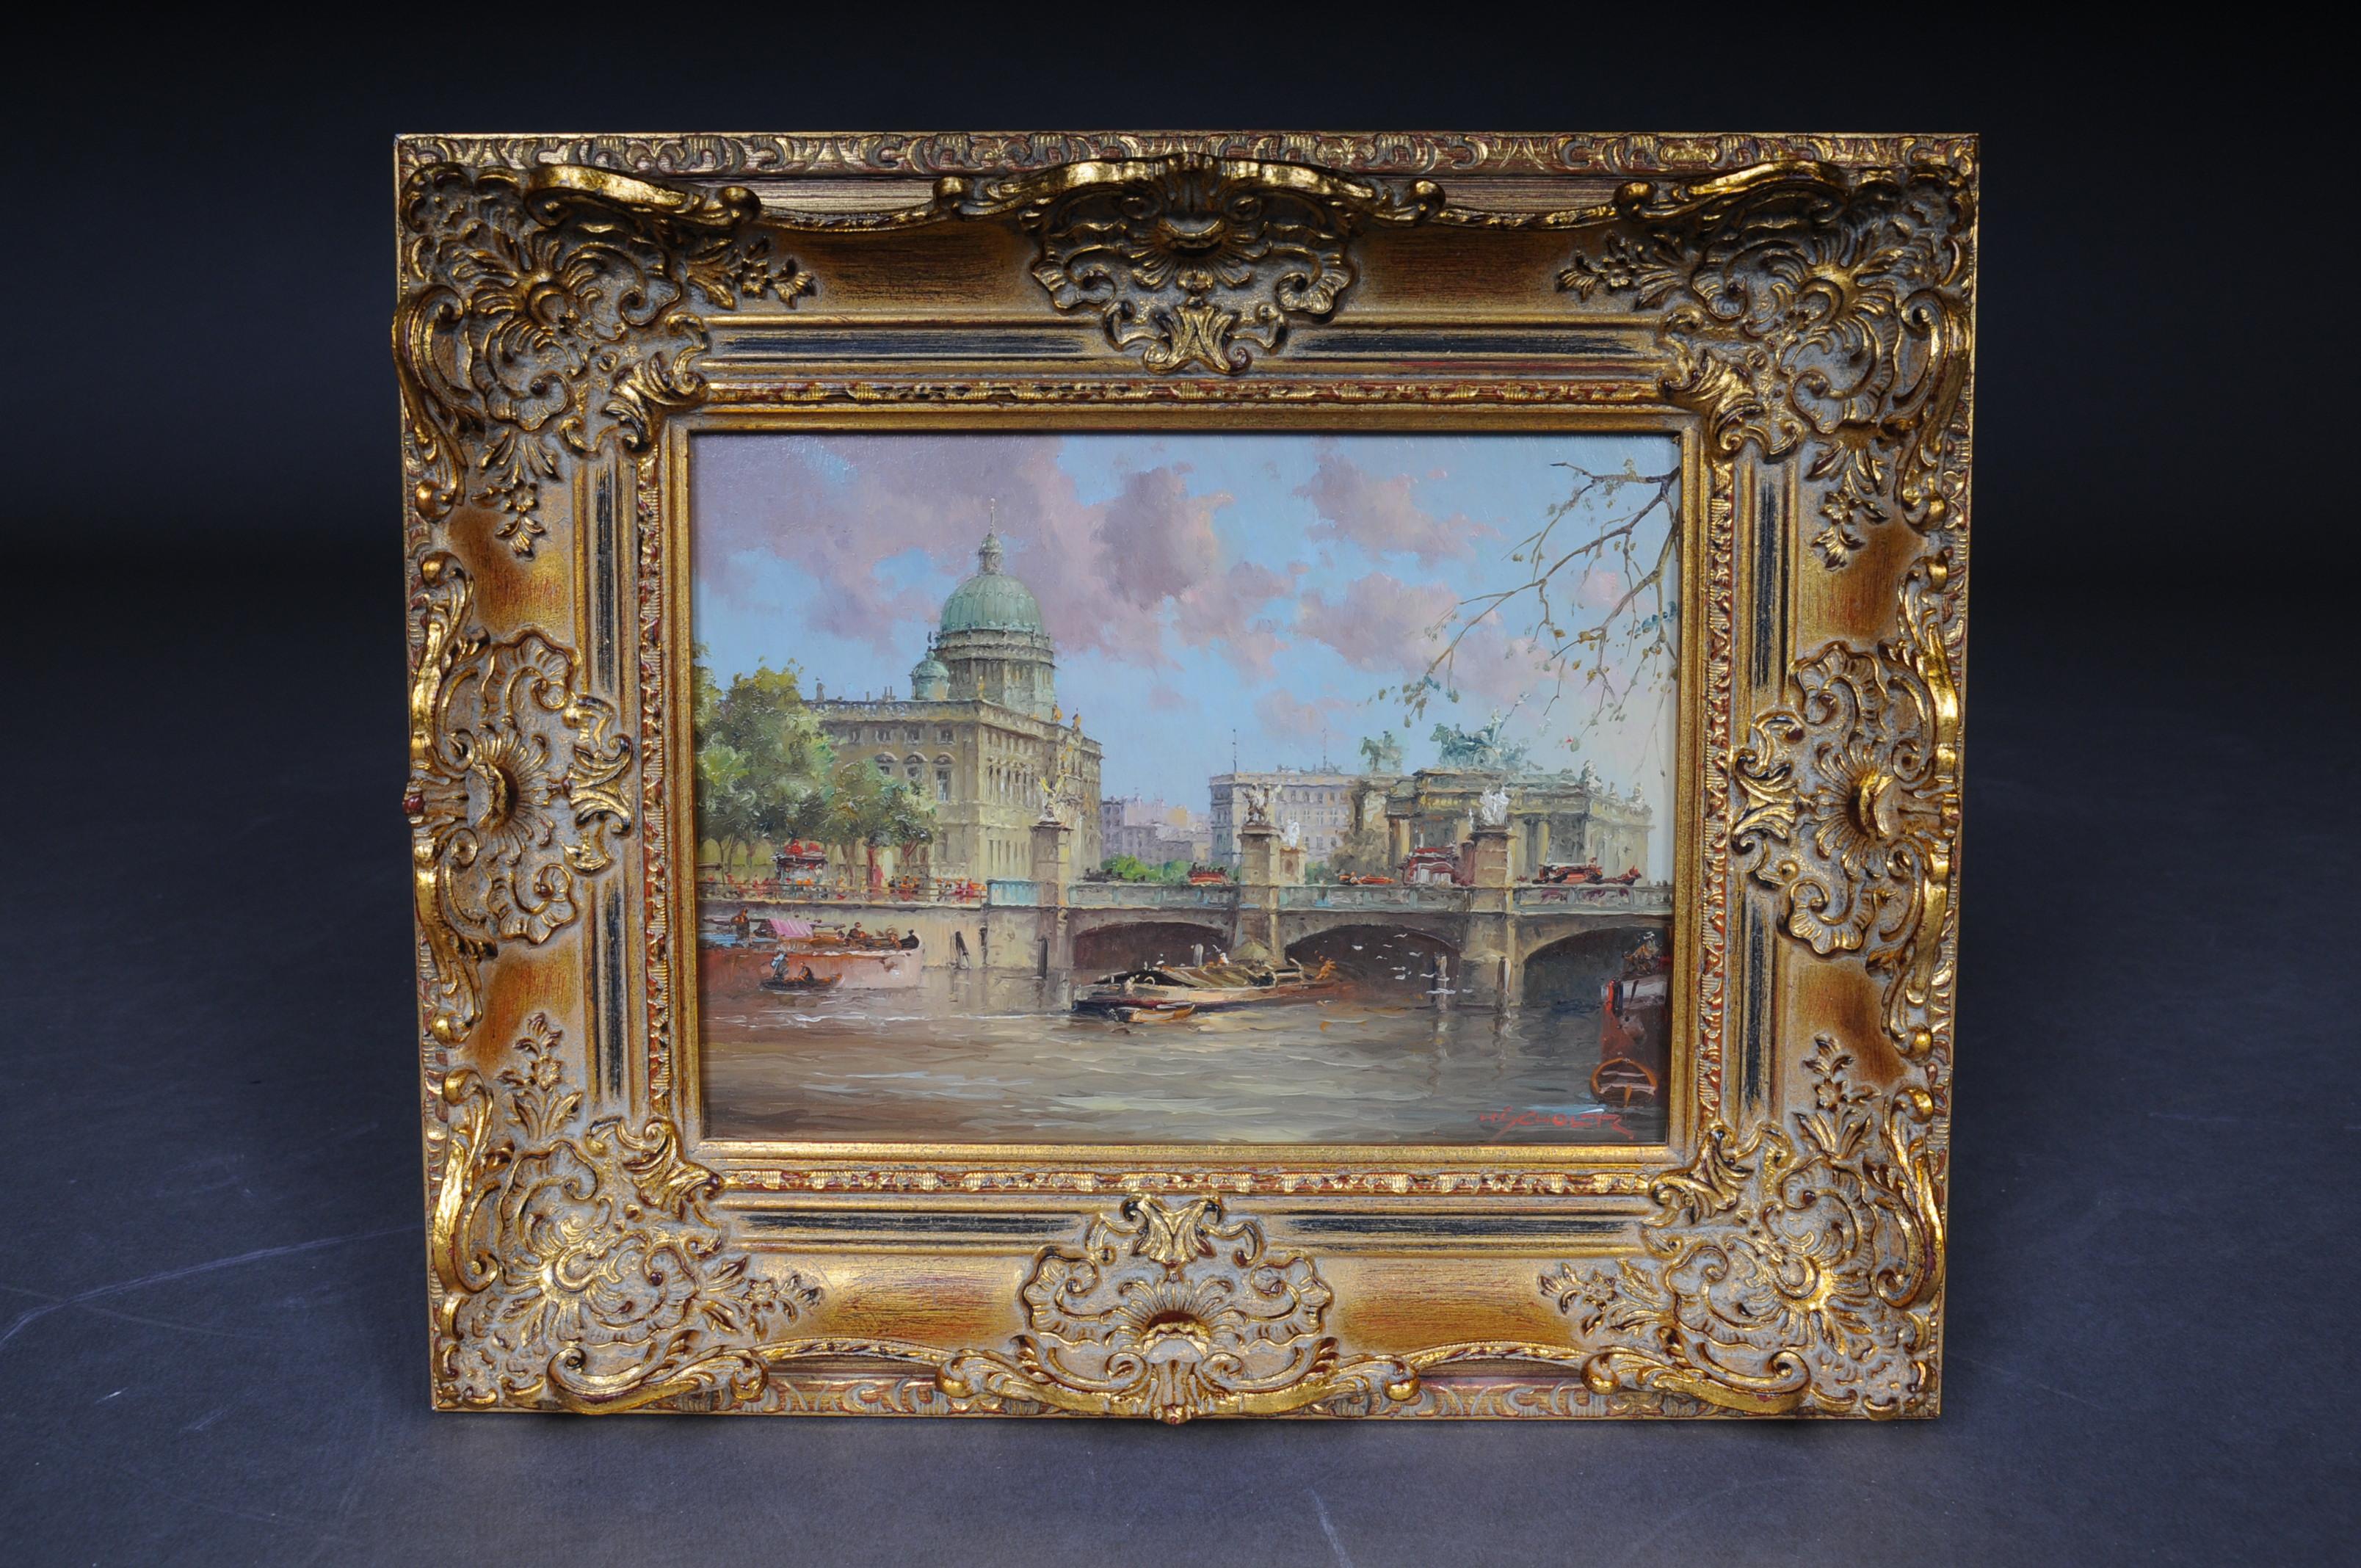 Oil painting Berlin Schlossbrücke sign. Heinz Scholtz, 20th century

Oil on copper painted painting signed by Heinz Scholtz from Berlin. Born October 30, 1925
View painting by the Berlin painter Heinz Scholtz. Expresses high quality